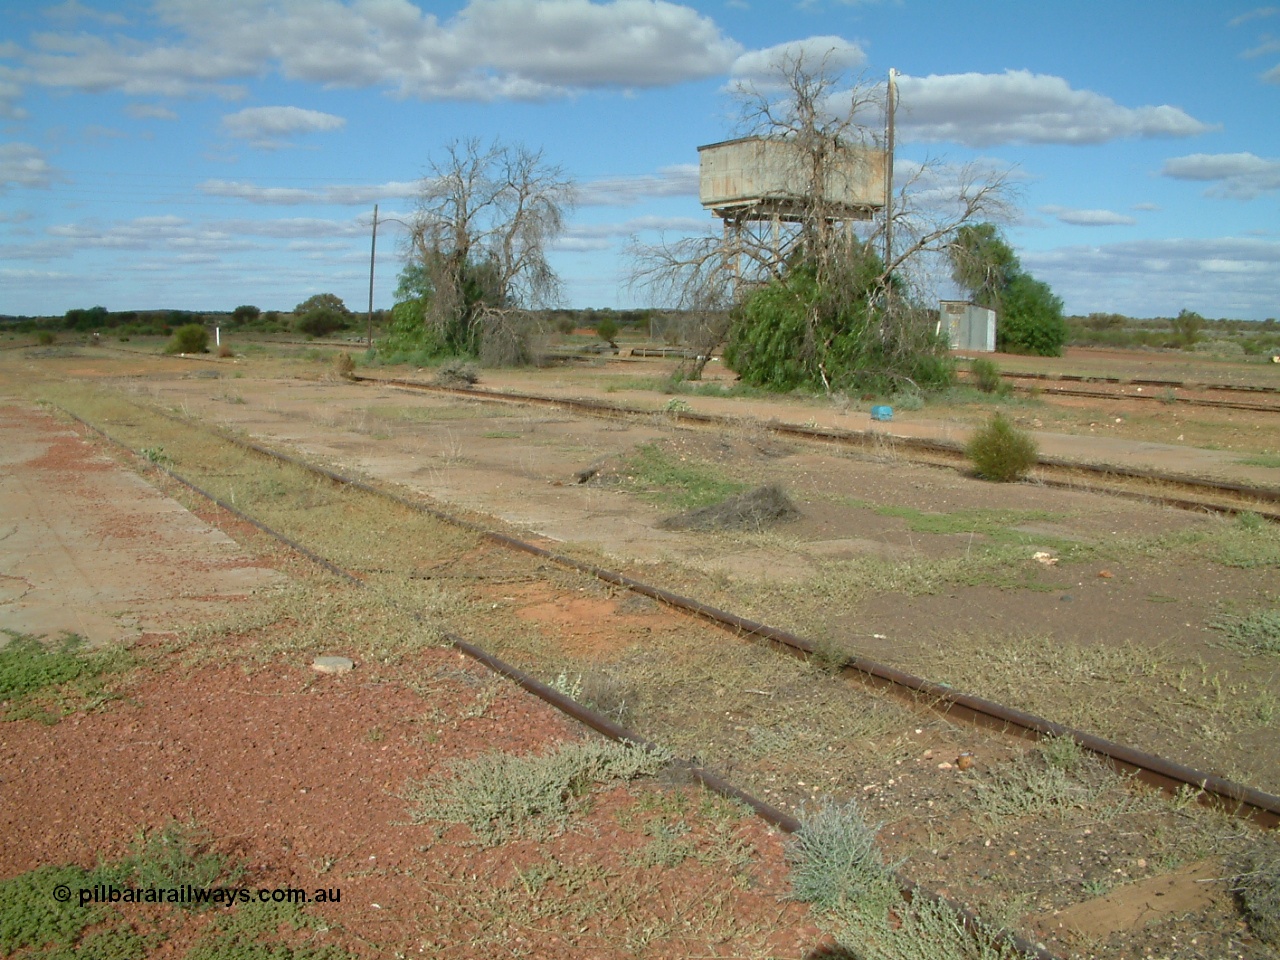 030415 154909
Tarcoola, at the 504.5 km, looking south east, roads are, Camp Train, No. 1 Loco, No. 2 Loco and No. 1 Water Road, mainline to the left. Water tank on stand. [url=https://goo.gl/maps/R5WaD6pqUgJG5abD9]GeoData location[/url]. 15th April 2003.
